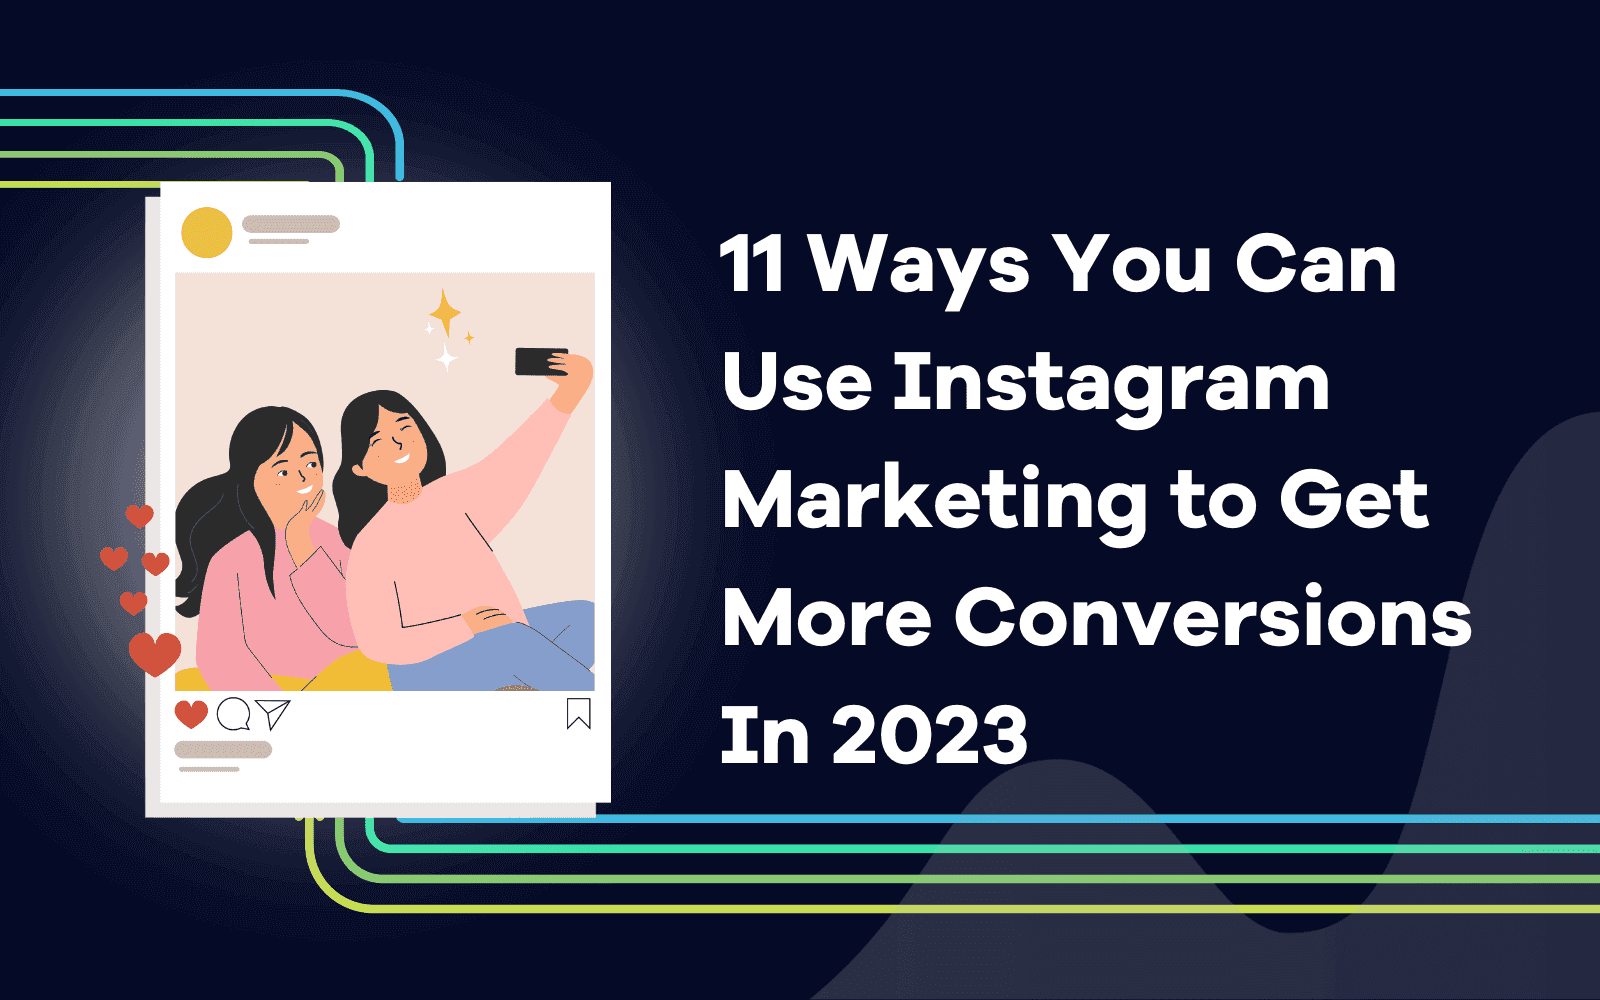 Ways You Can Use Instagram Marketing to Get More Conversions In 2023